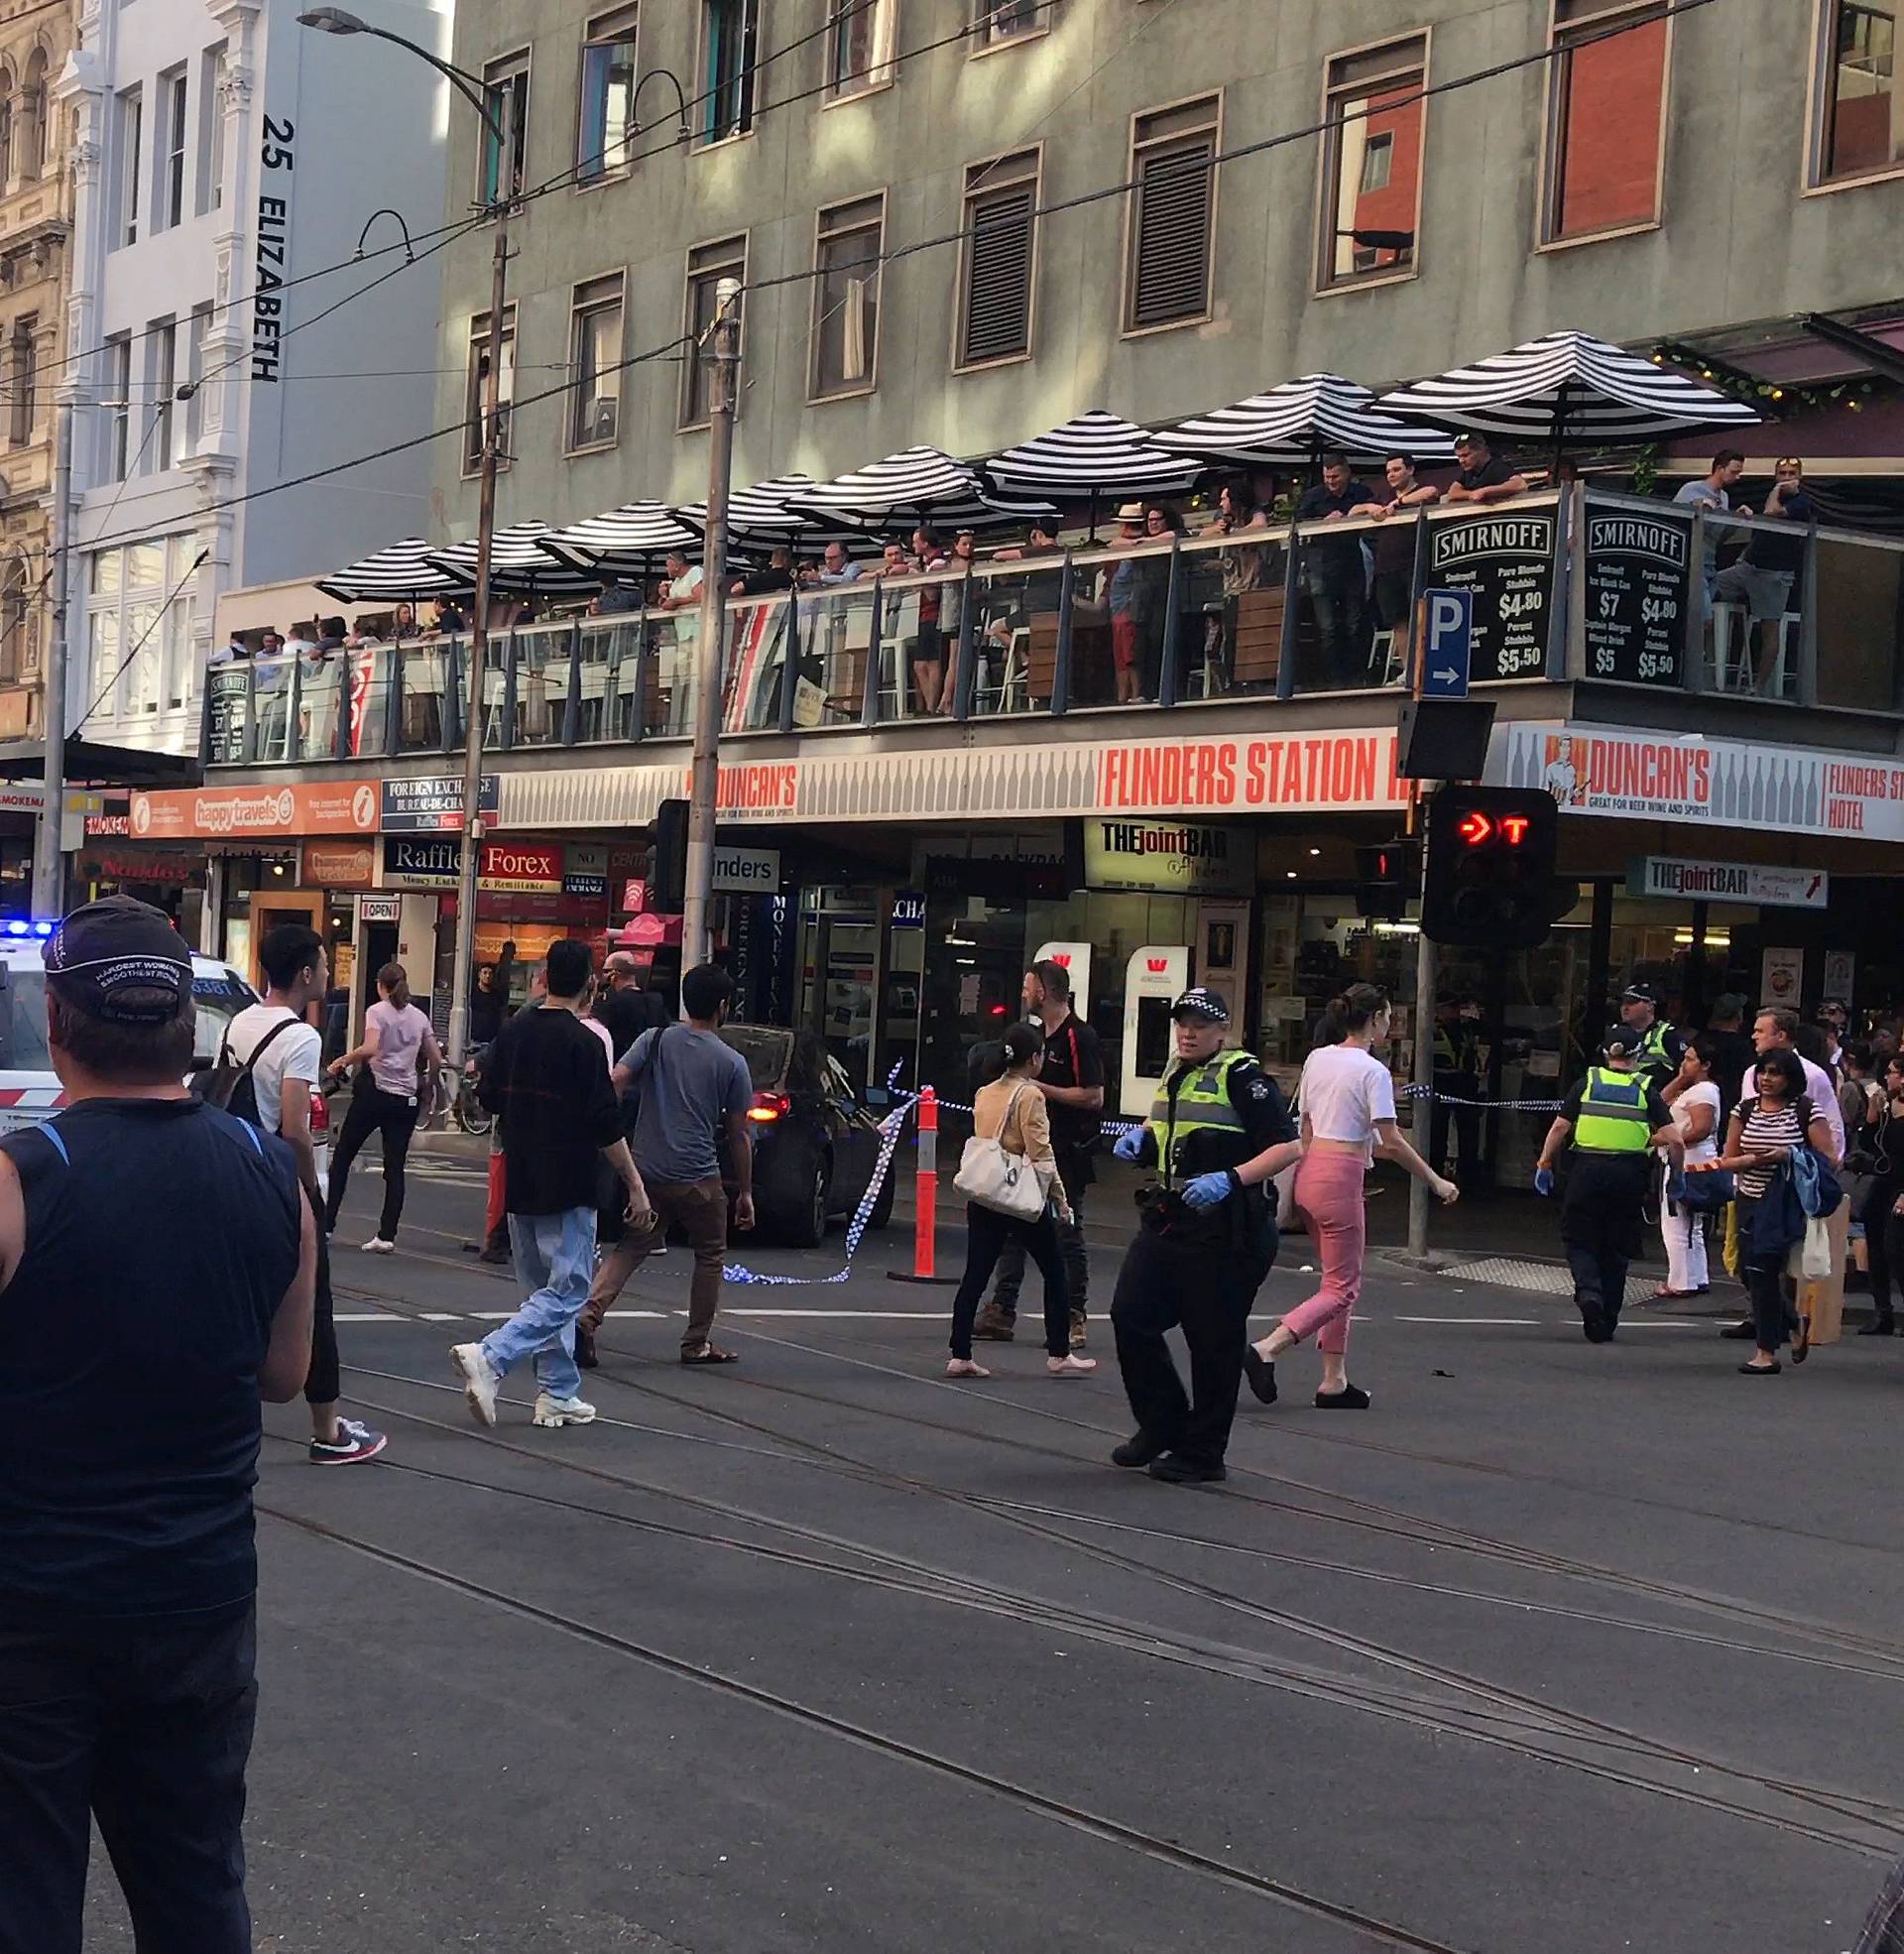 Police and emergency services attend the scene of an incident involving a vehicle on Flinders Street, as seen from Swanson Street